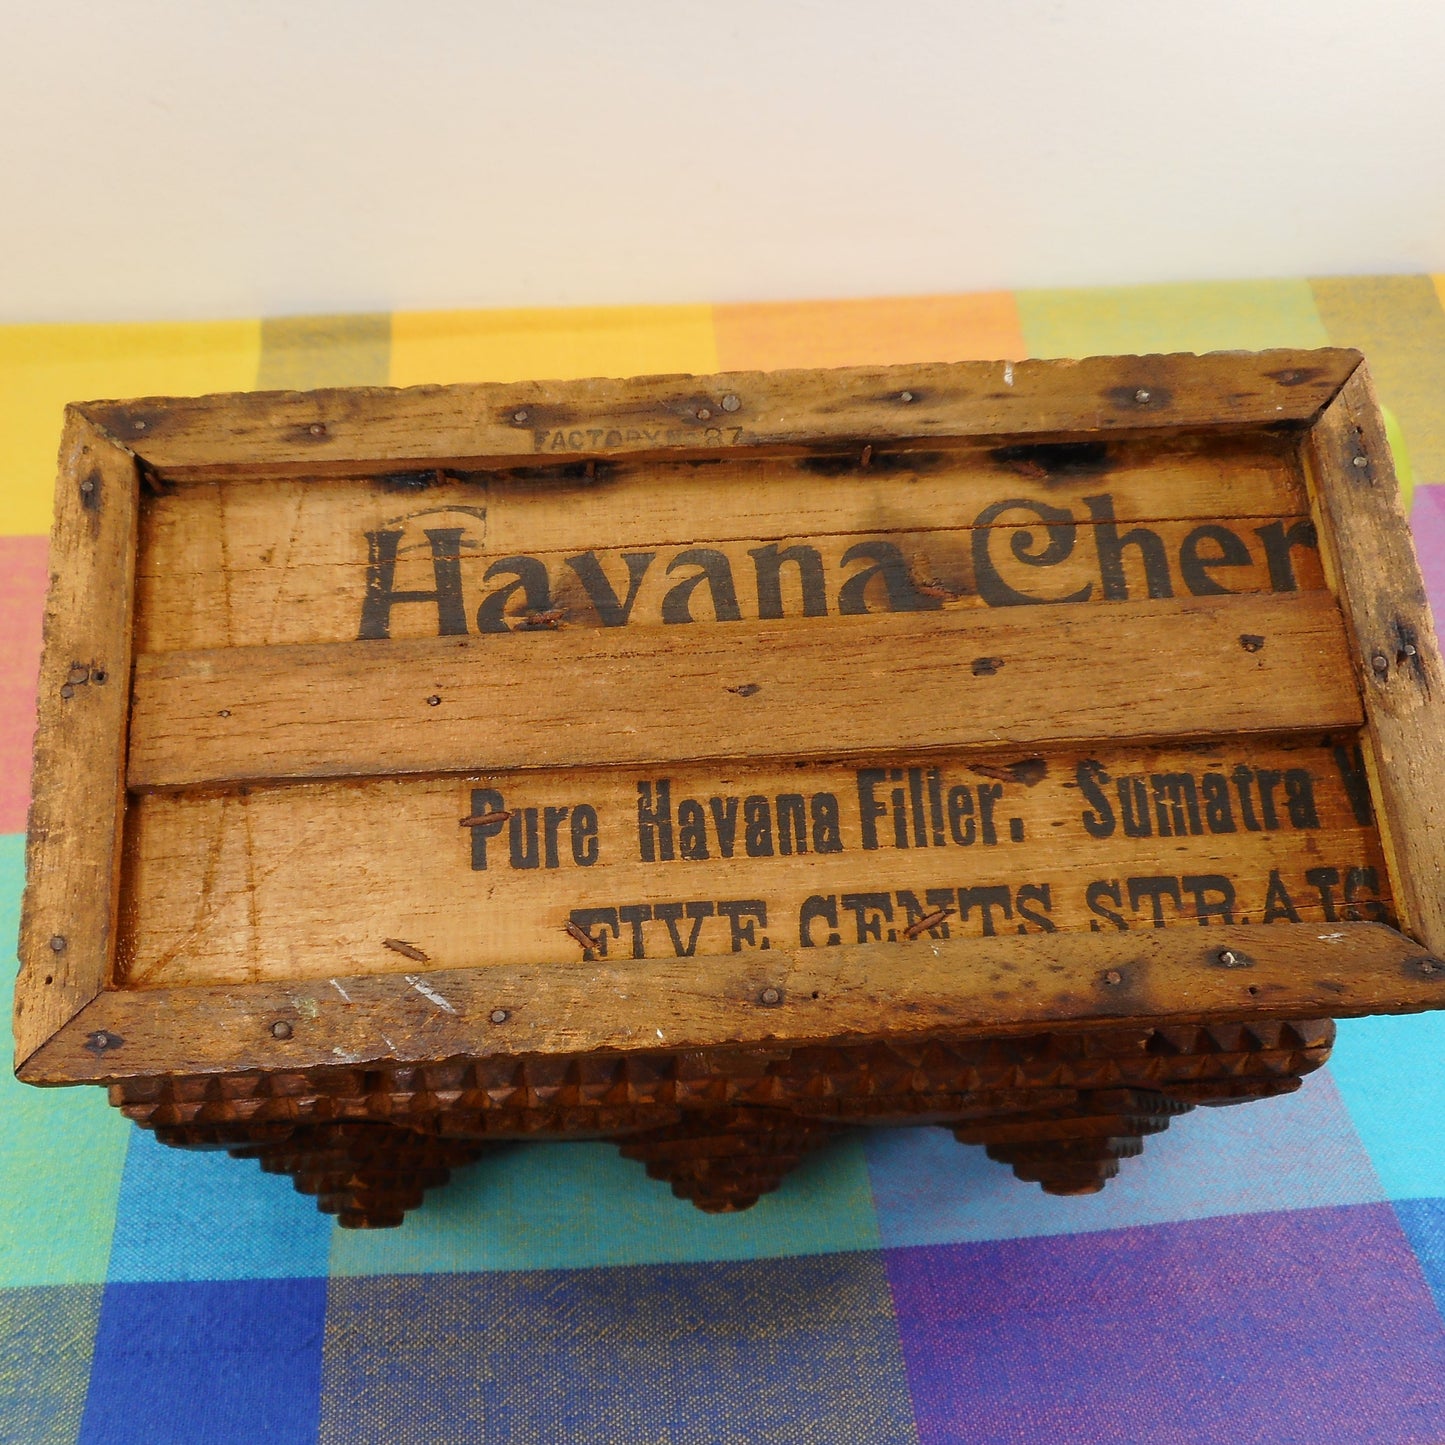 Antique Tramp Folk Art Carved From Cigar Box Footed Chest - 5 Cent Havana Cheroots Ladies 5 Cent Cheroots